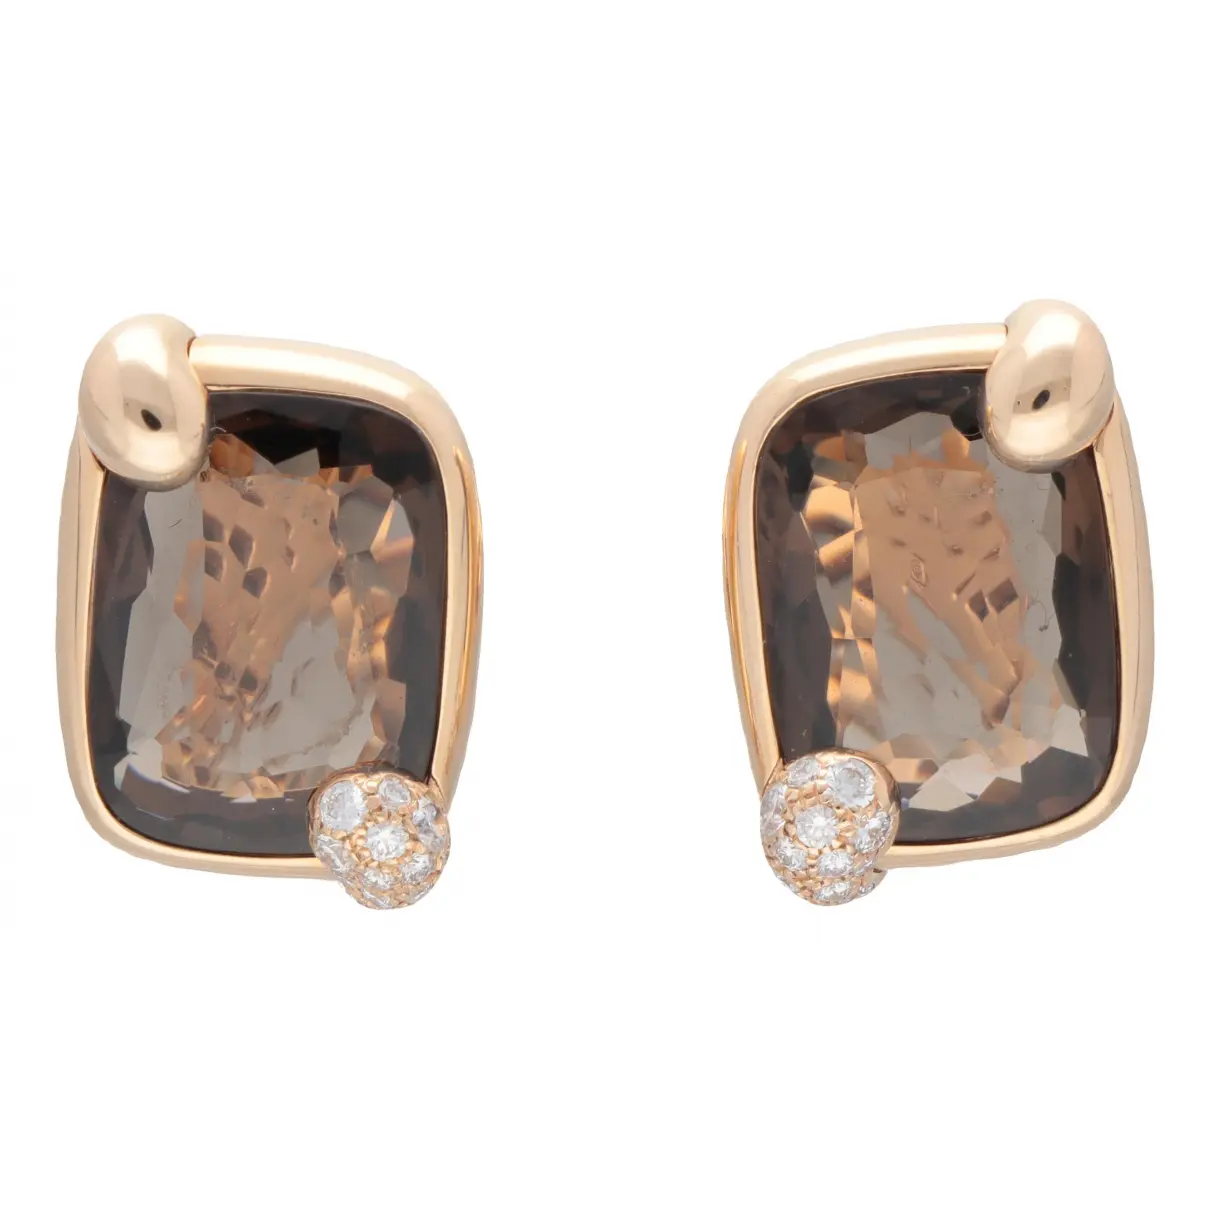 Ritratto pink gold earrings